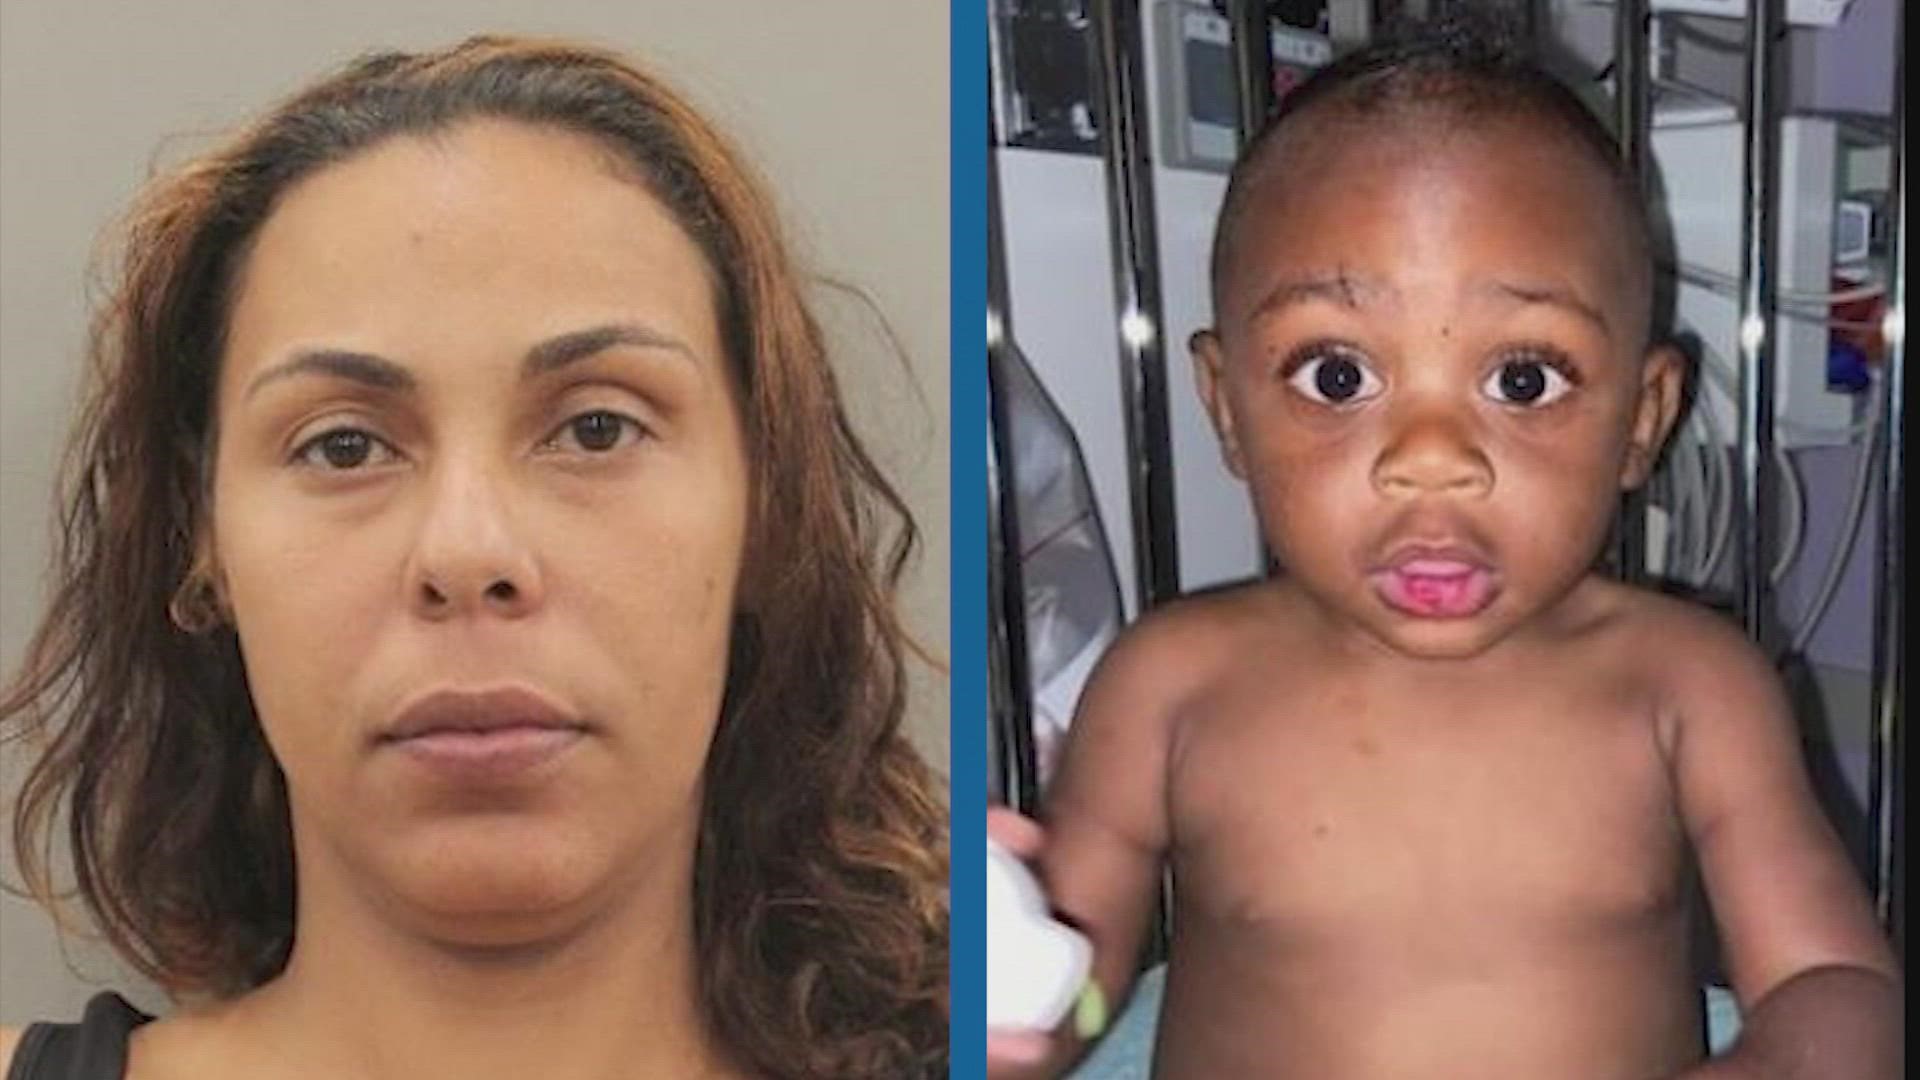 The mother of the baby found alone outside a Houston apartment is behind bars. She was arrested on two felony warrants on a January DUI.